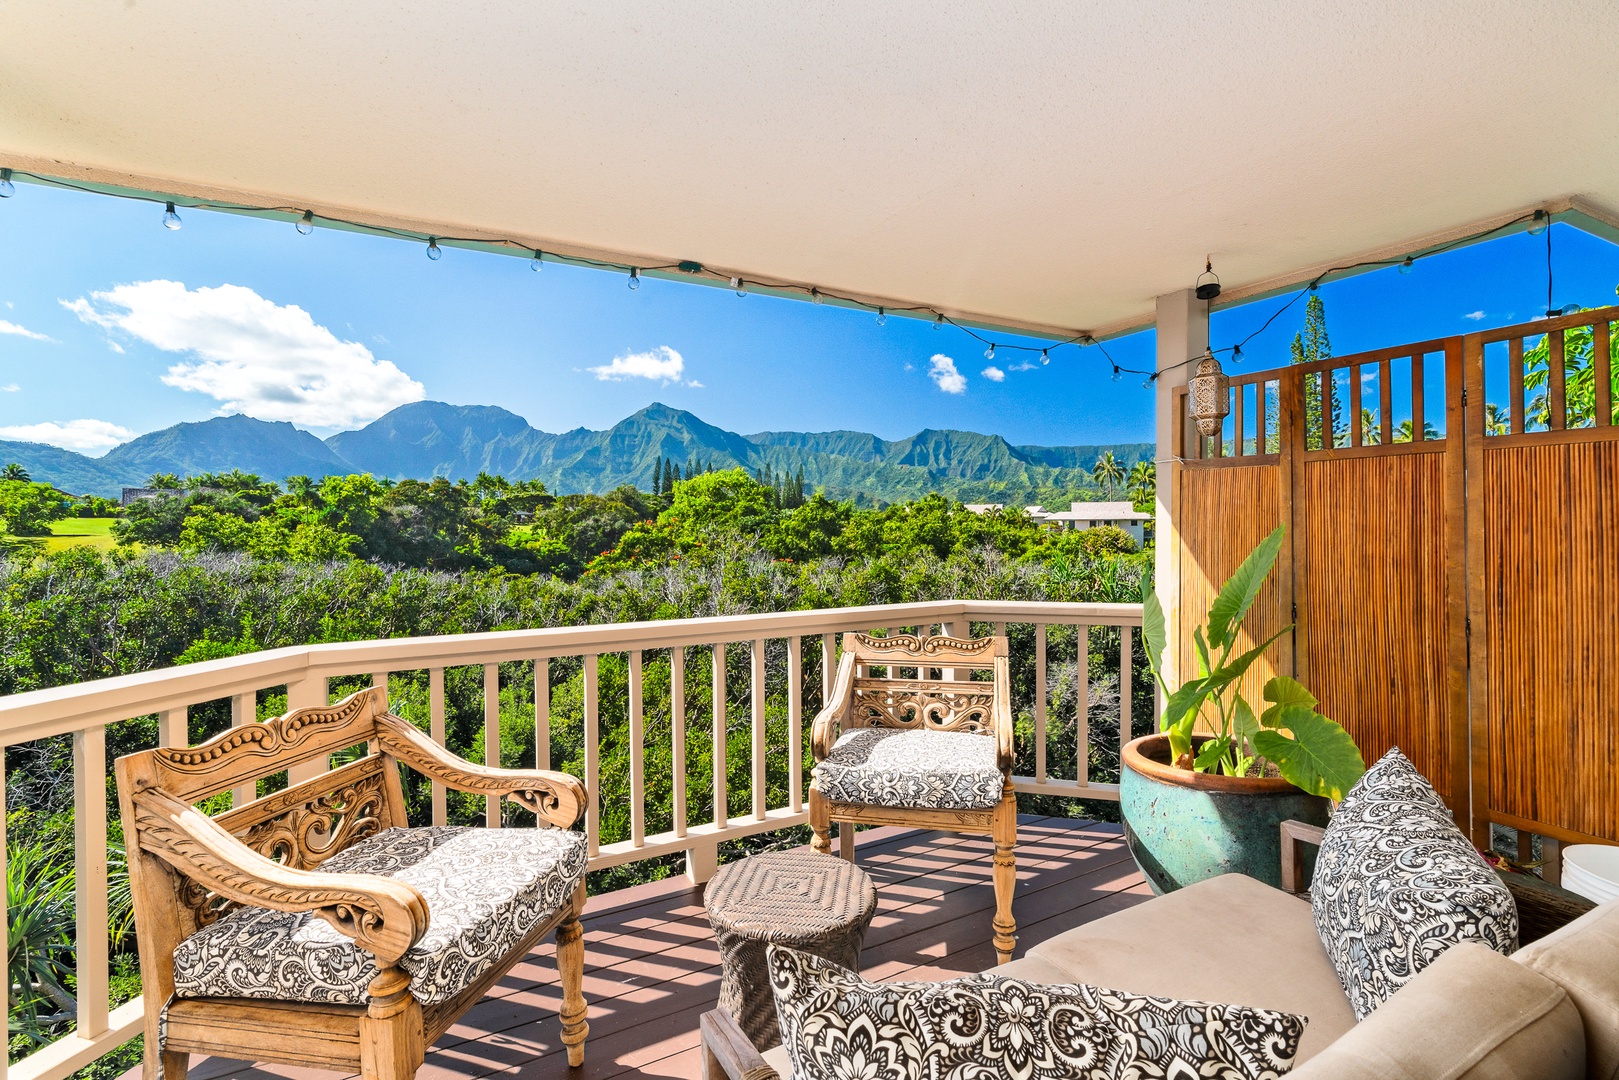 Princeville Vacation Rentals, Makanalani - Breathtaking mountain views from our private lanai, complete with comfy seating—your private escape into nature's embrace